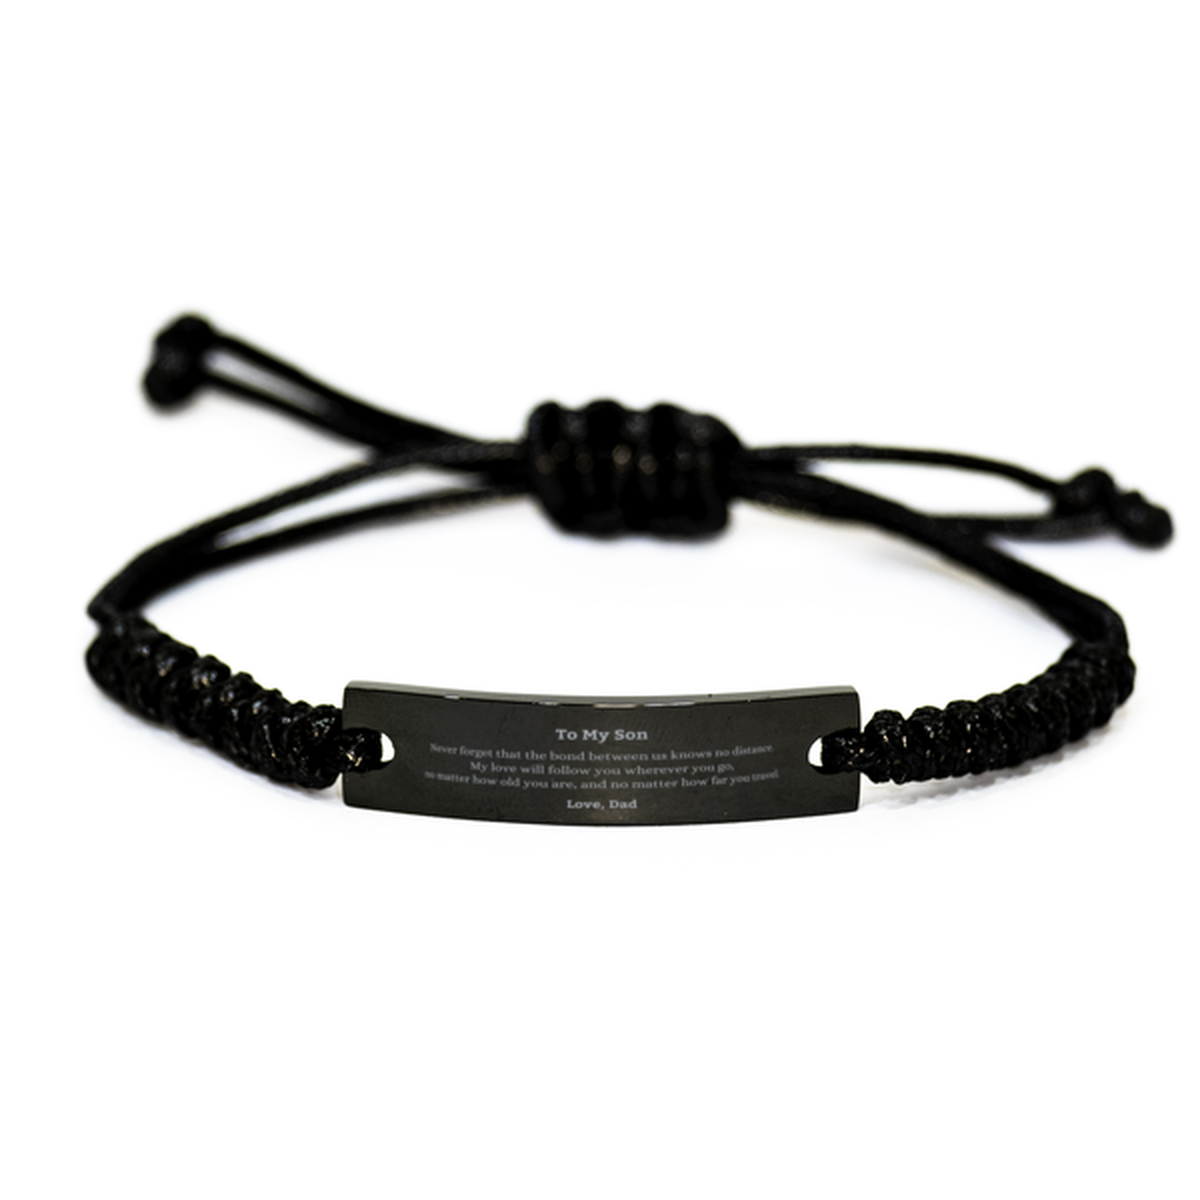 Son Birthday Gifts from Dad, Adjustable Black Rope Bracelet for Son Christmas Graduation Unique Gifts Son Never forget that the bond between us knows no distance. Love, Dad